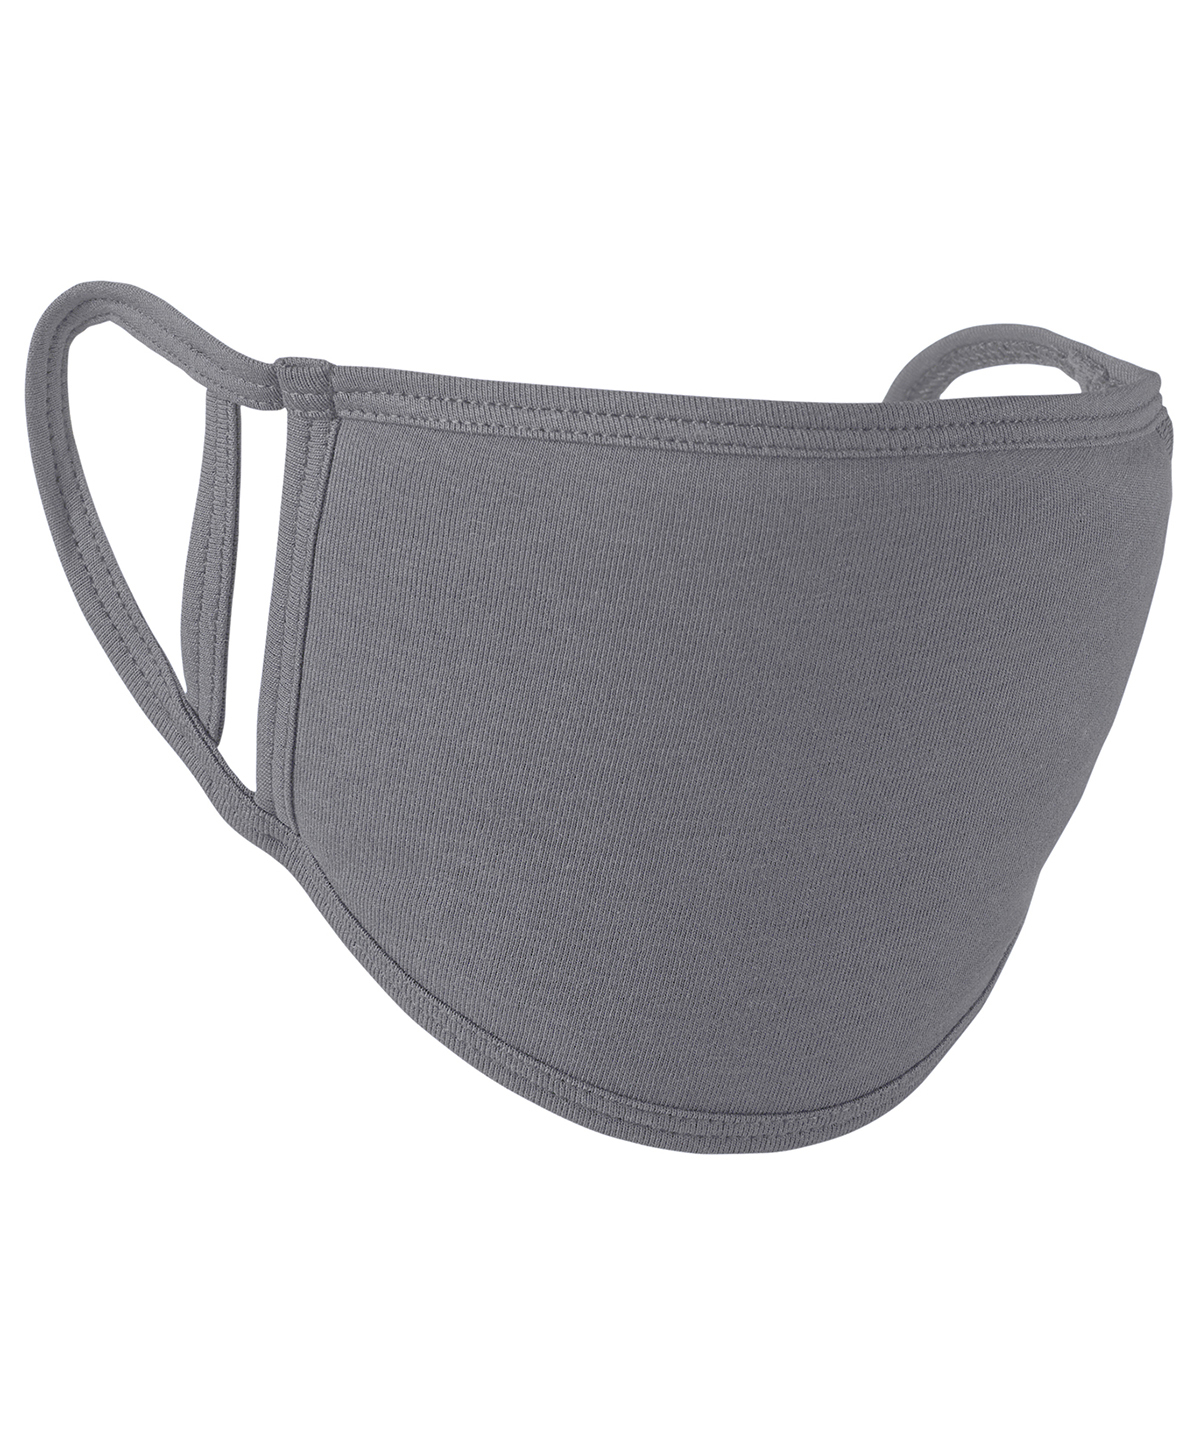 Washable 2-ply Face Covering in grey